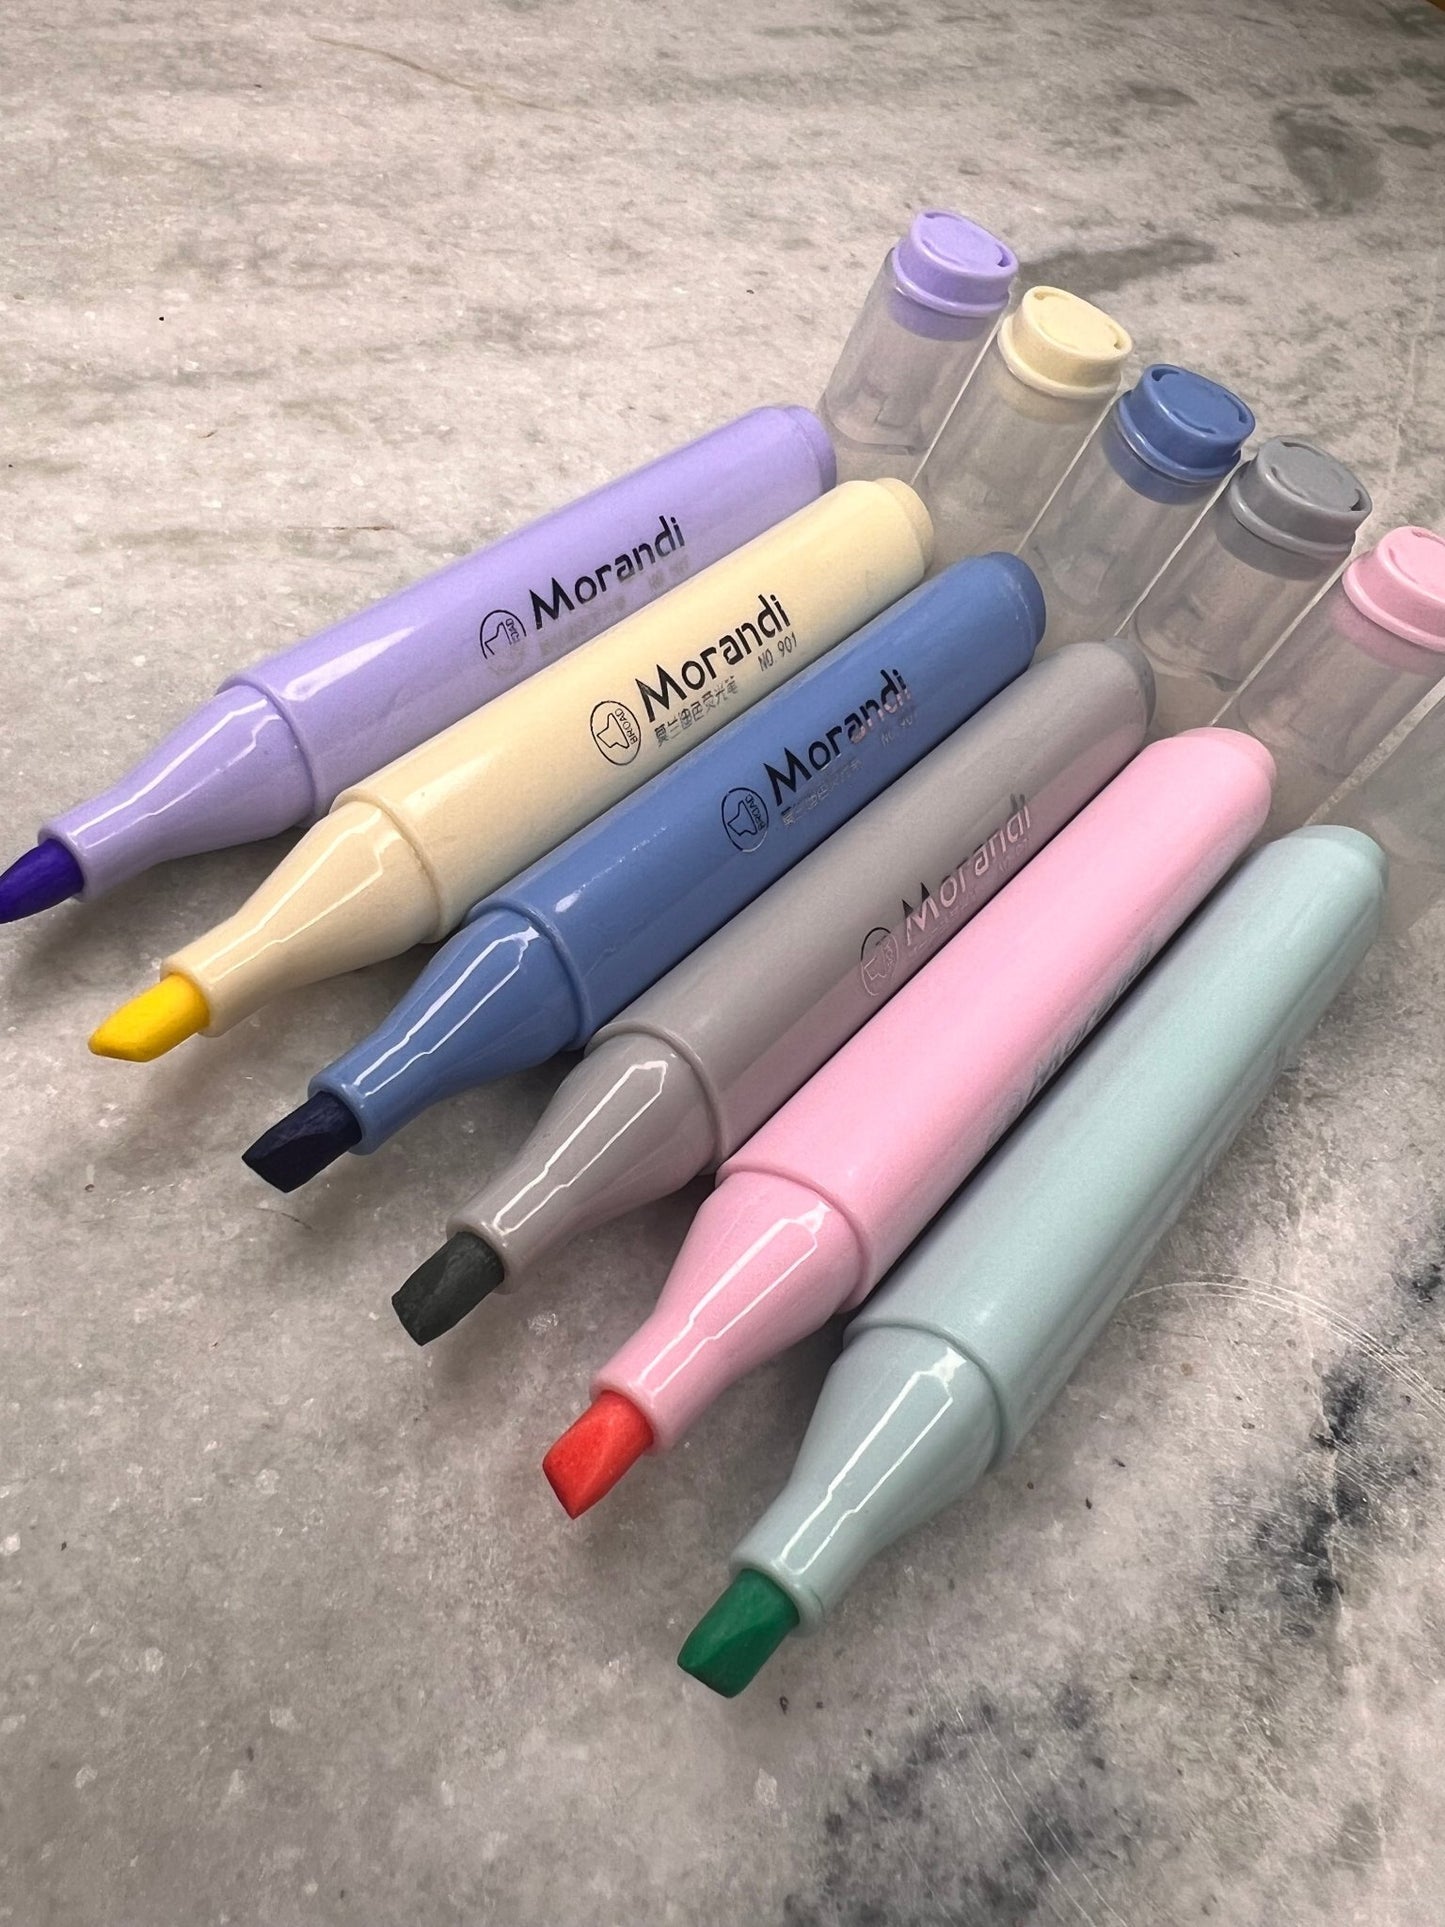 Morandi highlighter markers with beautiful pastel colors and broad tip 